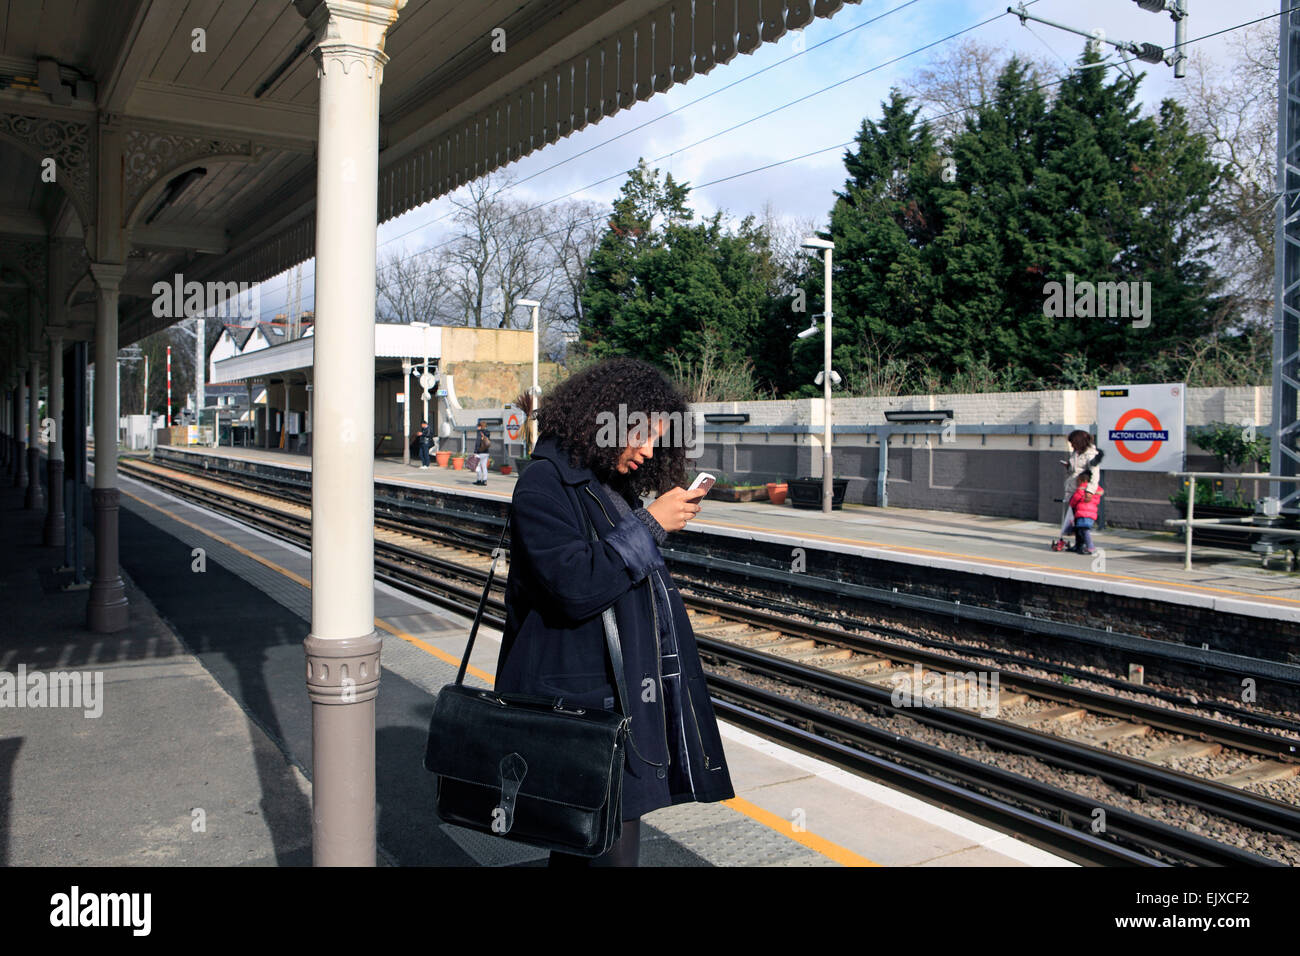 united kingdom london acton central overground station a teenage girl texting Stock Photo